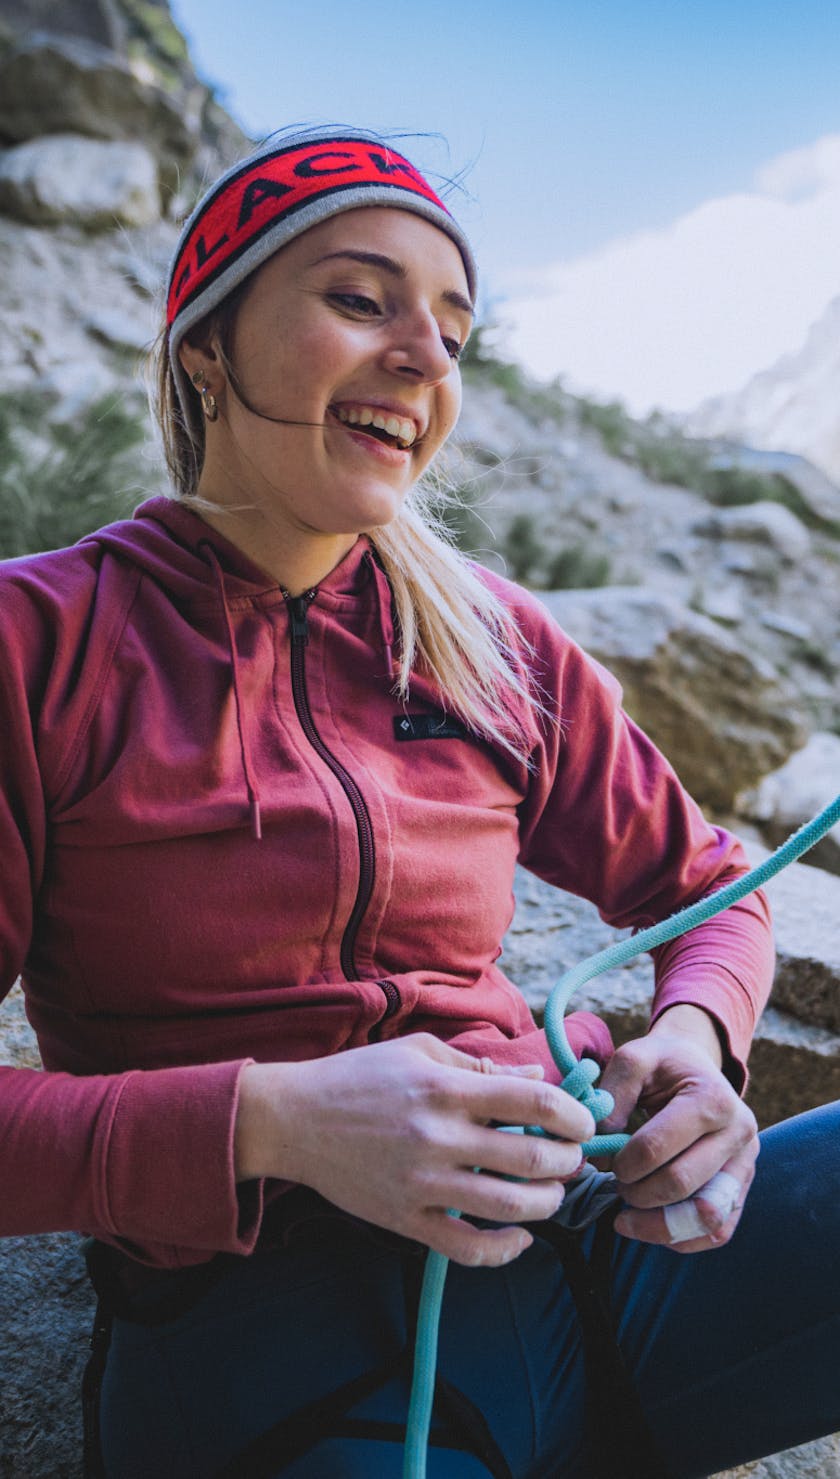 A climber unties their Double Bowline climbing knot.